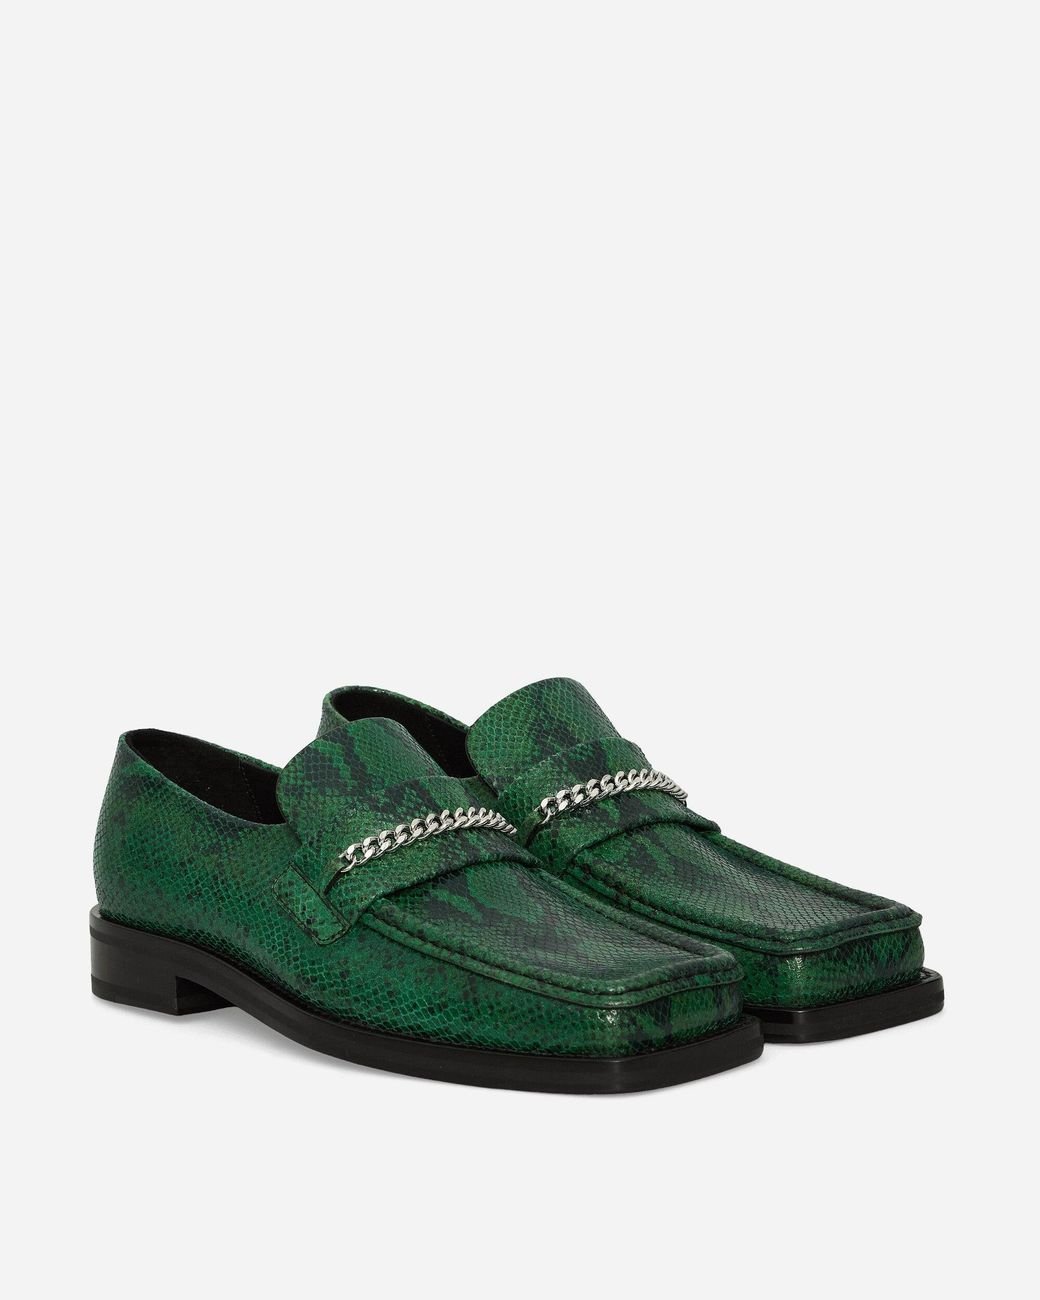 Martine Rose crocodile-effect chain-detail loafers - Green